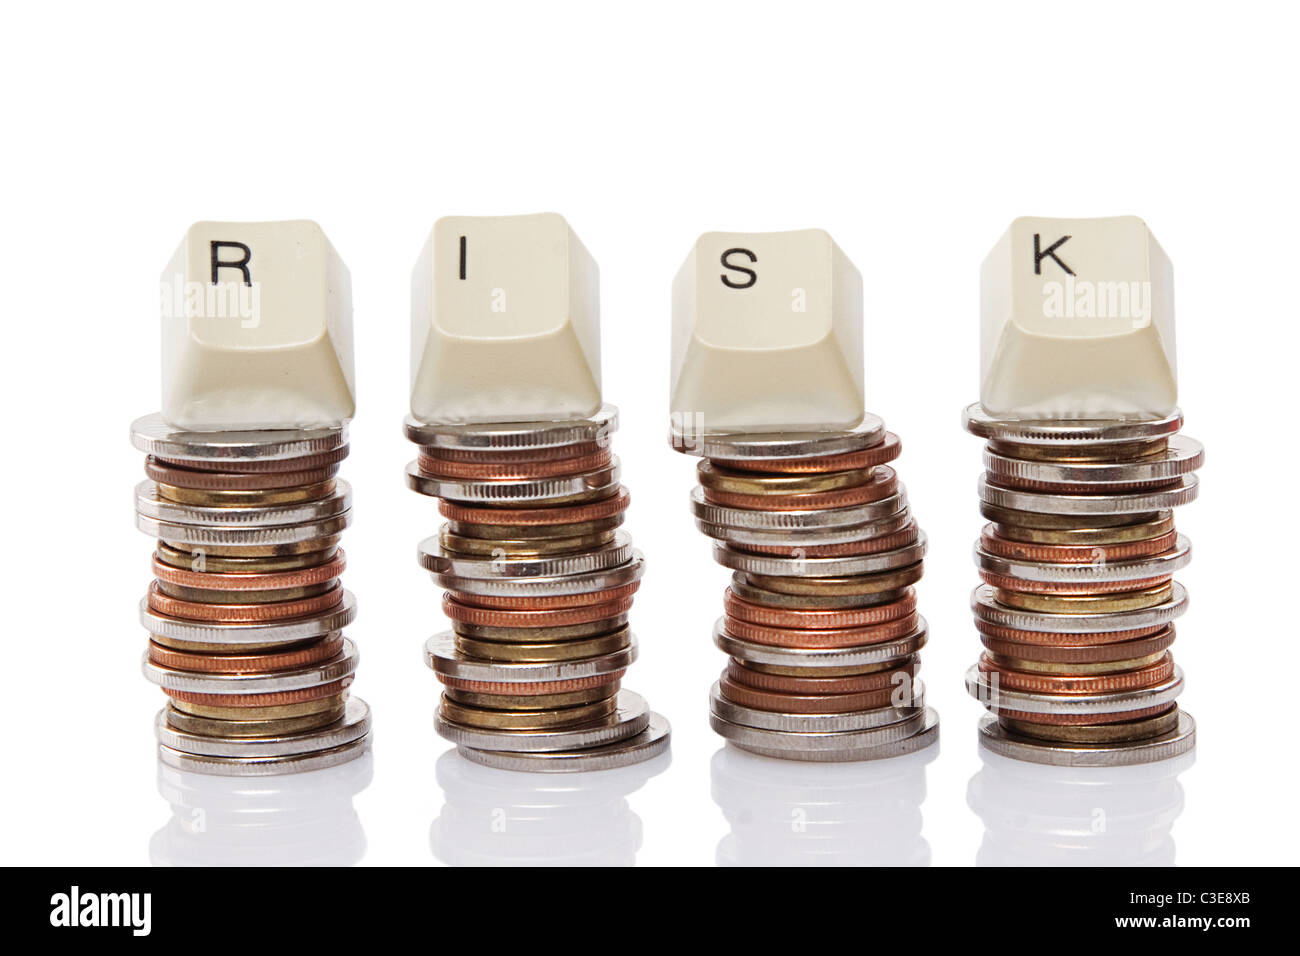 Keyboard Letter Spelling Risk Atop Coin Stacks Stock Photo